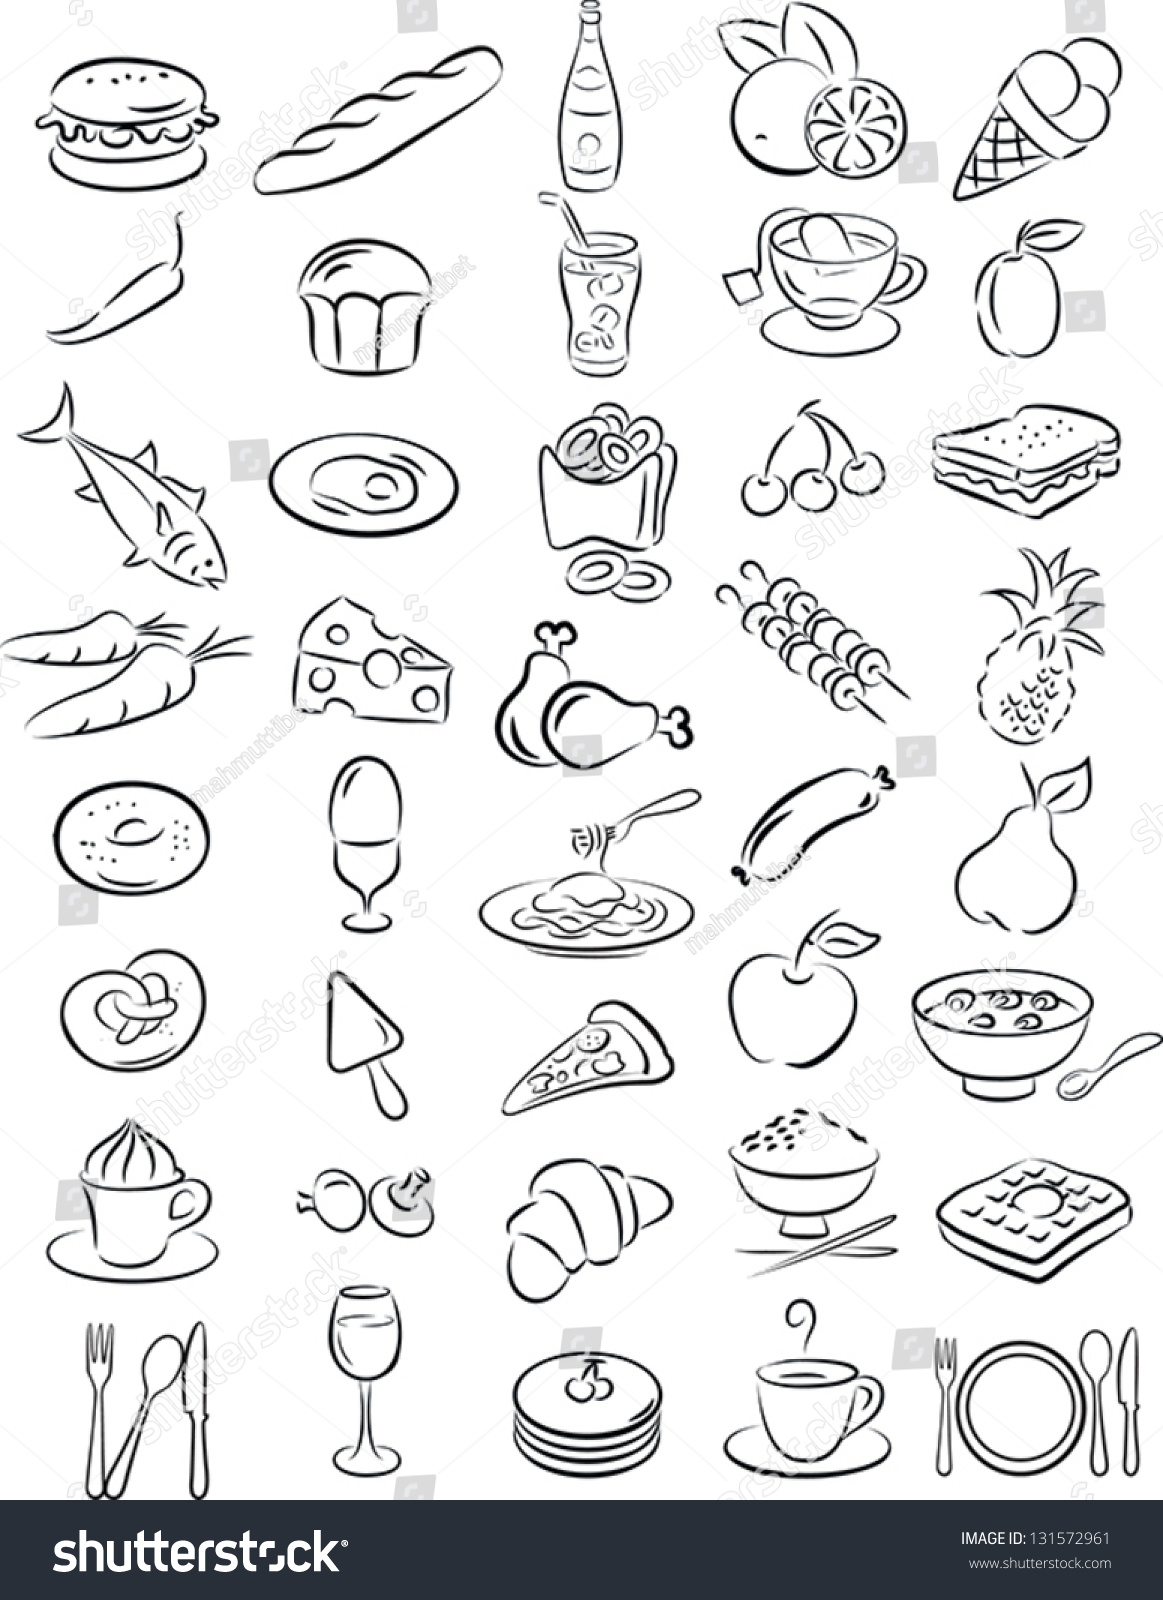 Vector Illustration Of Food Collection In Black And White - 131572961